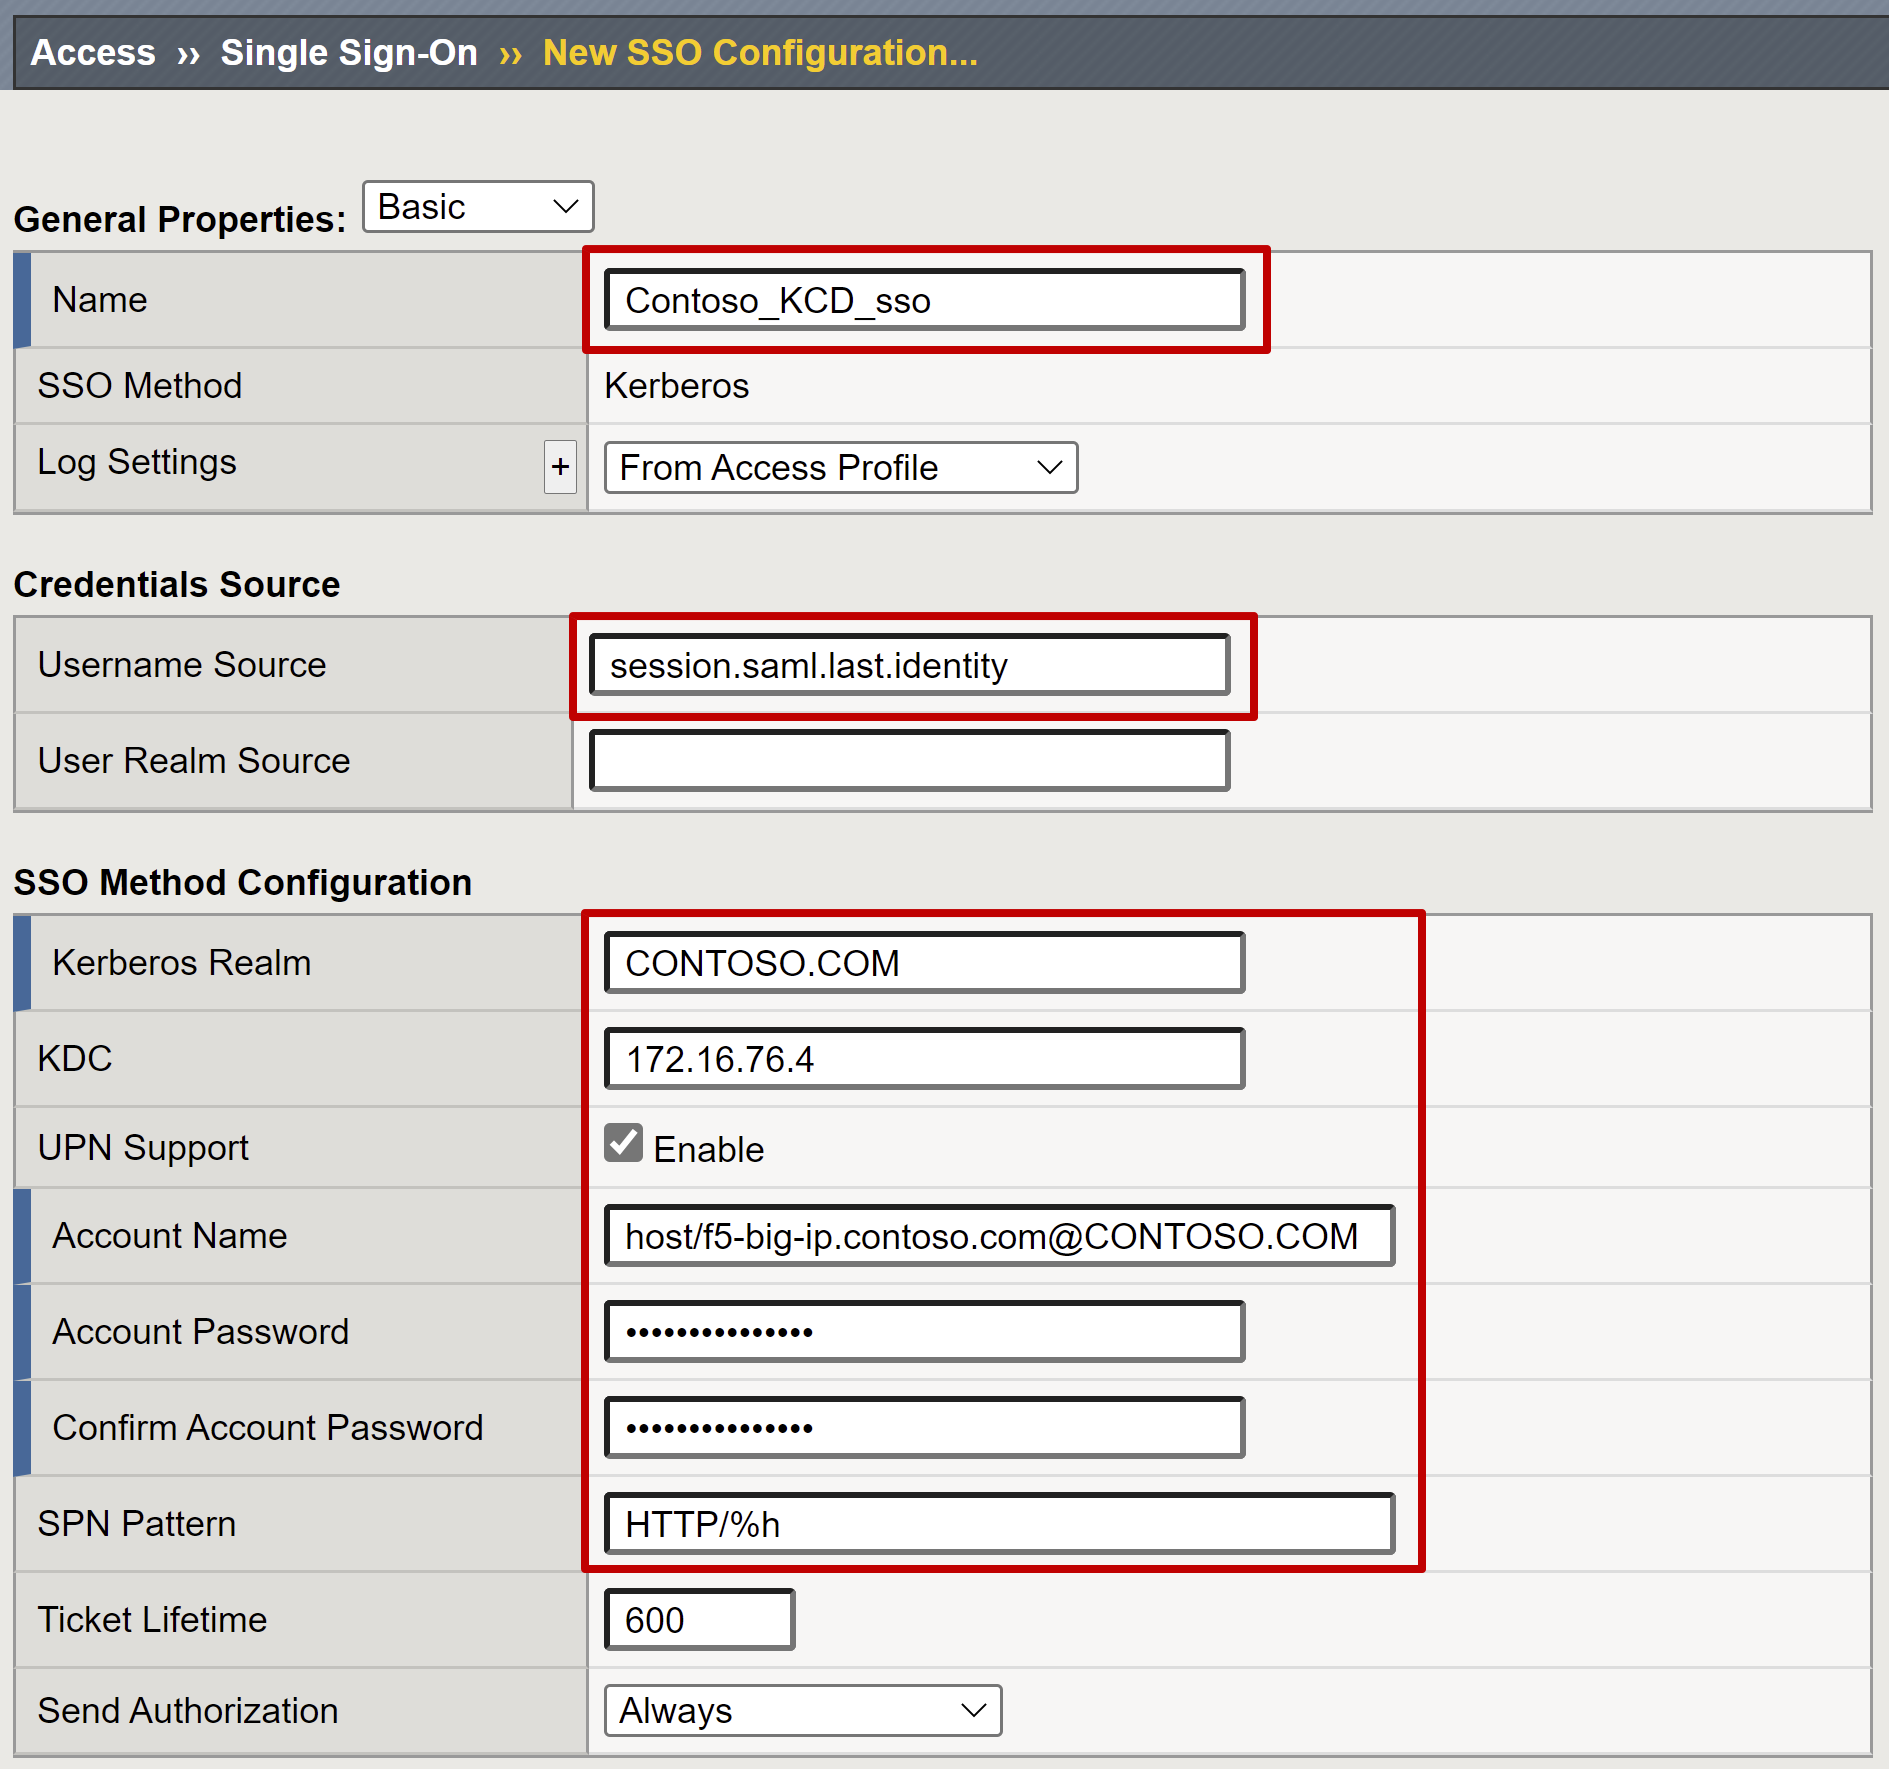 Screenshot of Name, Username Source, and SSO Method Configuration entries on General Properties.